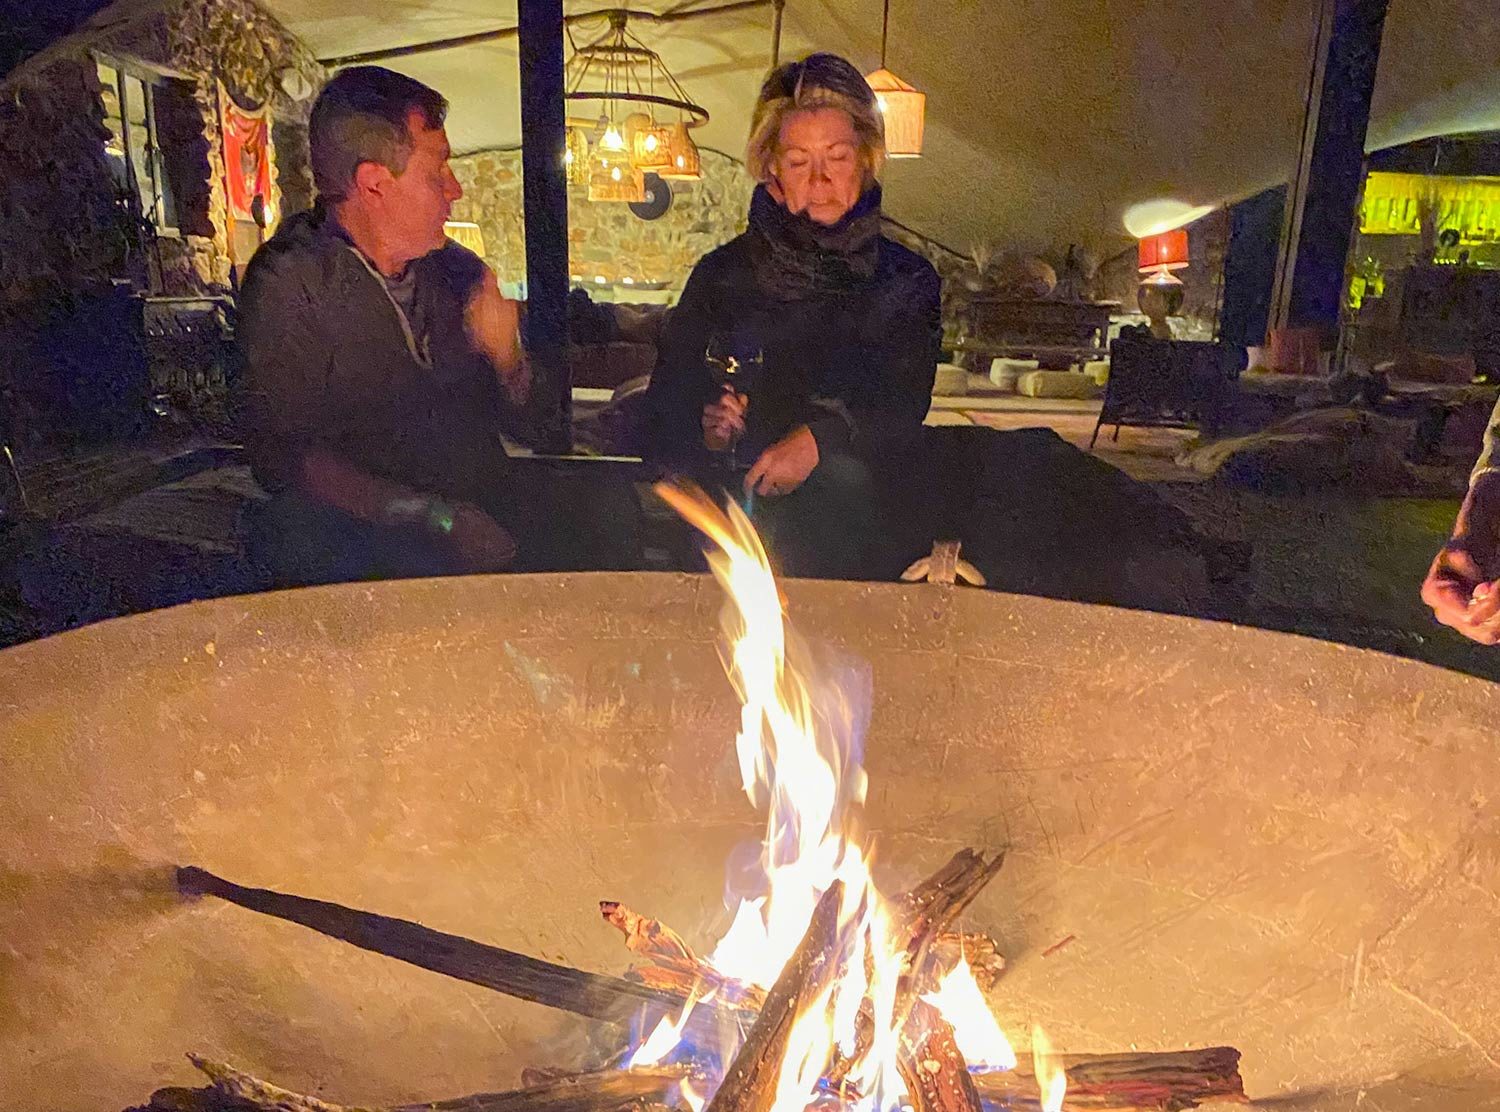 Habitas Namibia Swapping stories with fellow guests over the firepit